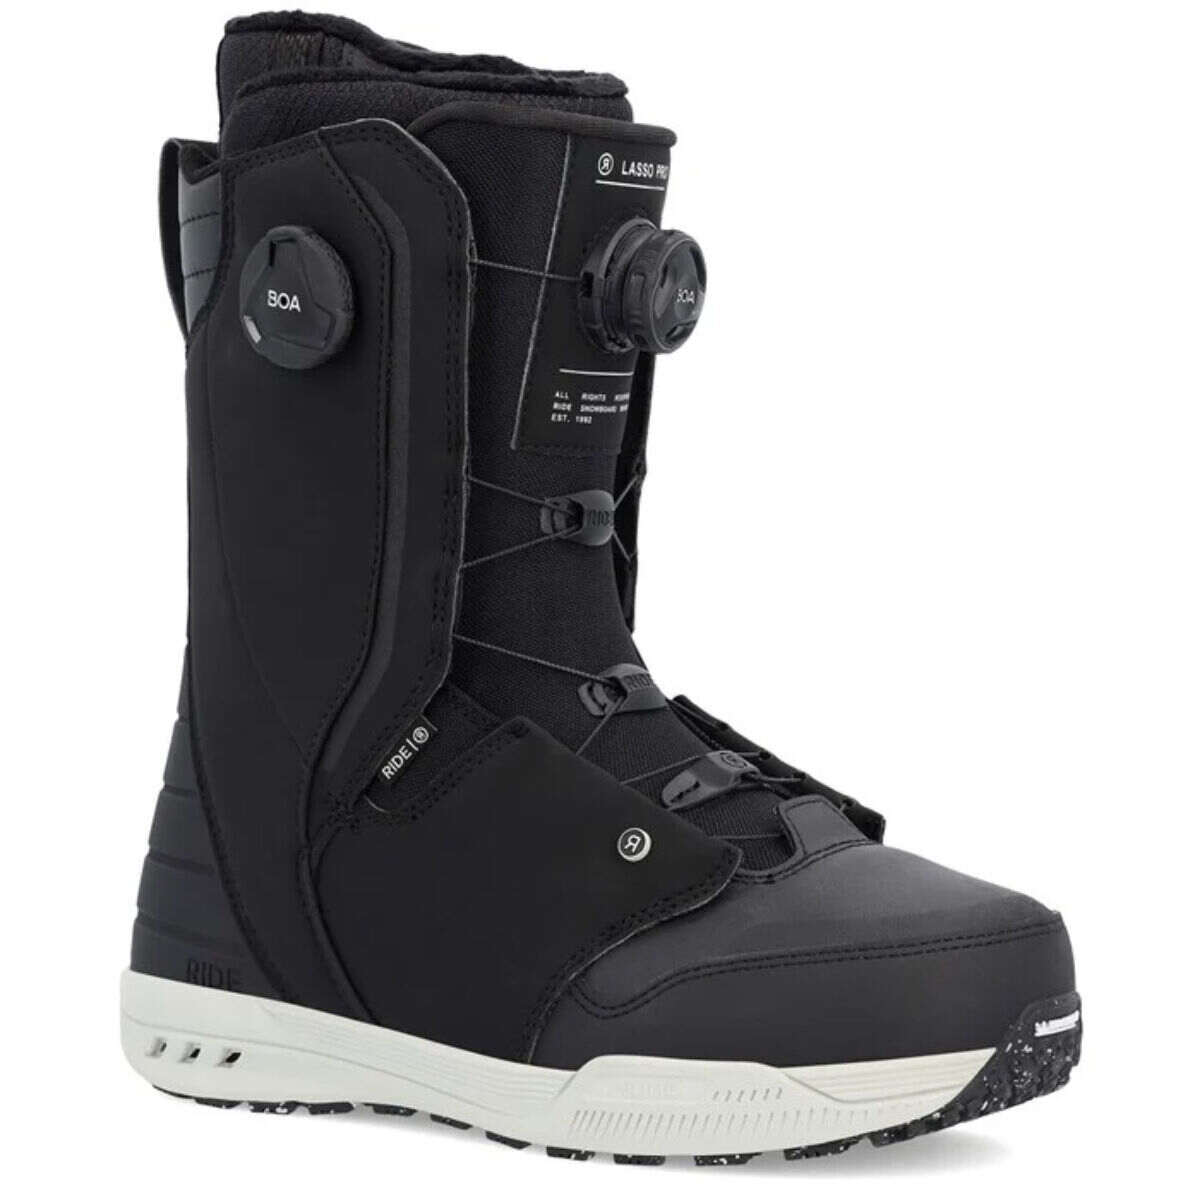 Ride Snowboard Boots | Christy Sports